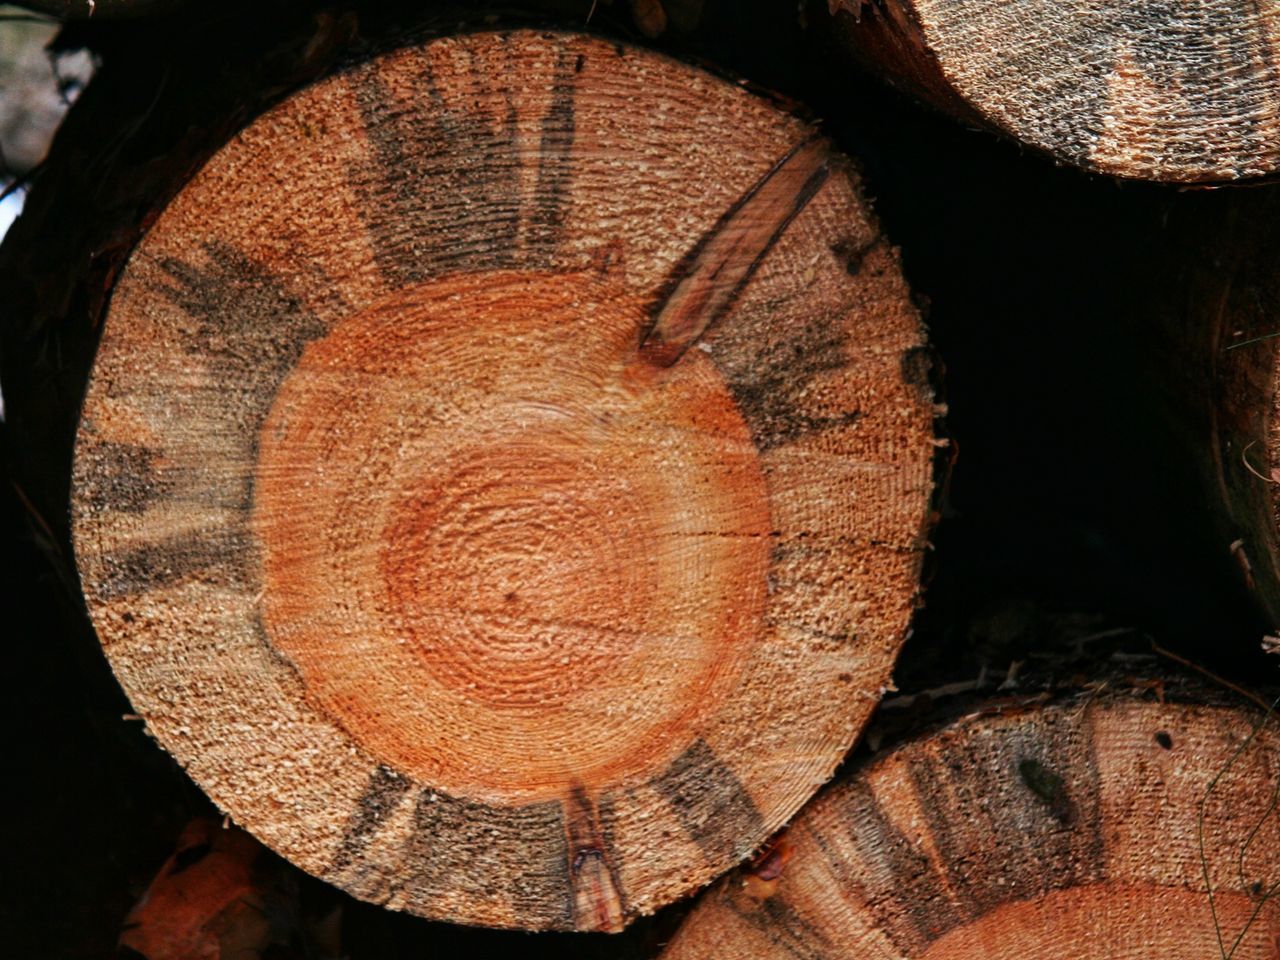 CLOSE-UP OF FIREWOOD